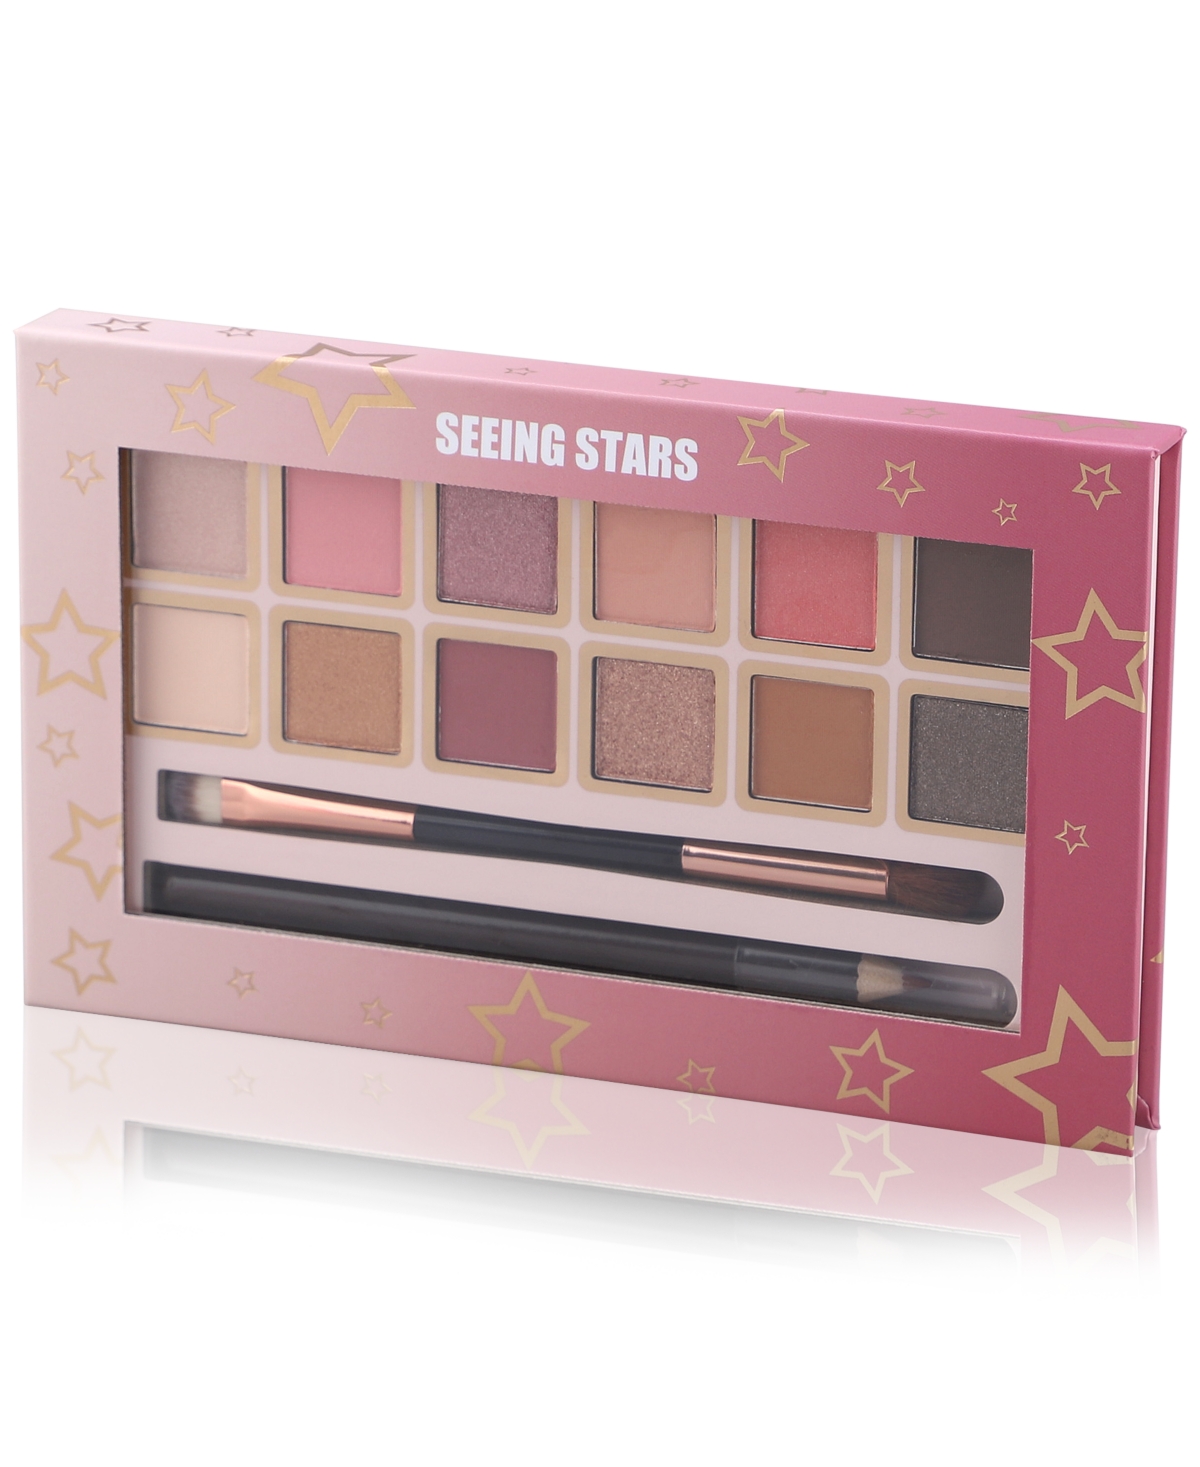 Shop Created For Macy's Seeing Stars 12-pan Eyeshadow Palette,  In No Color